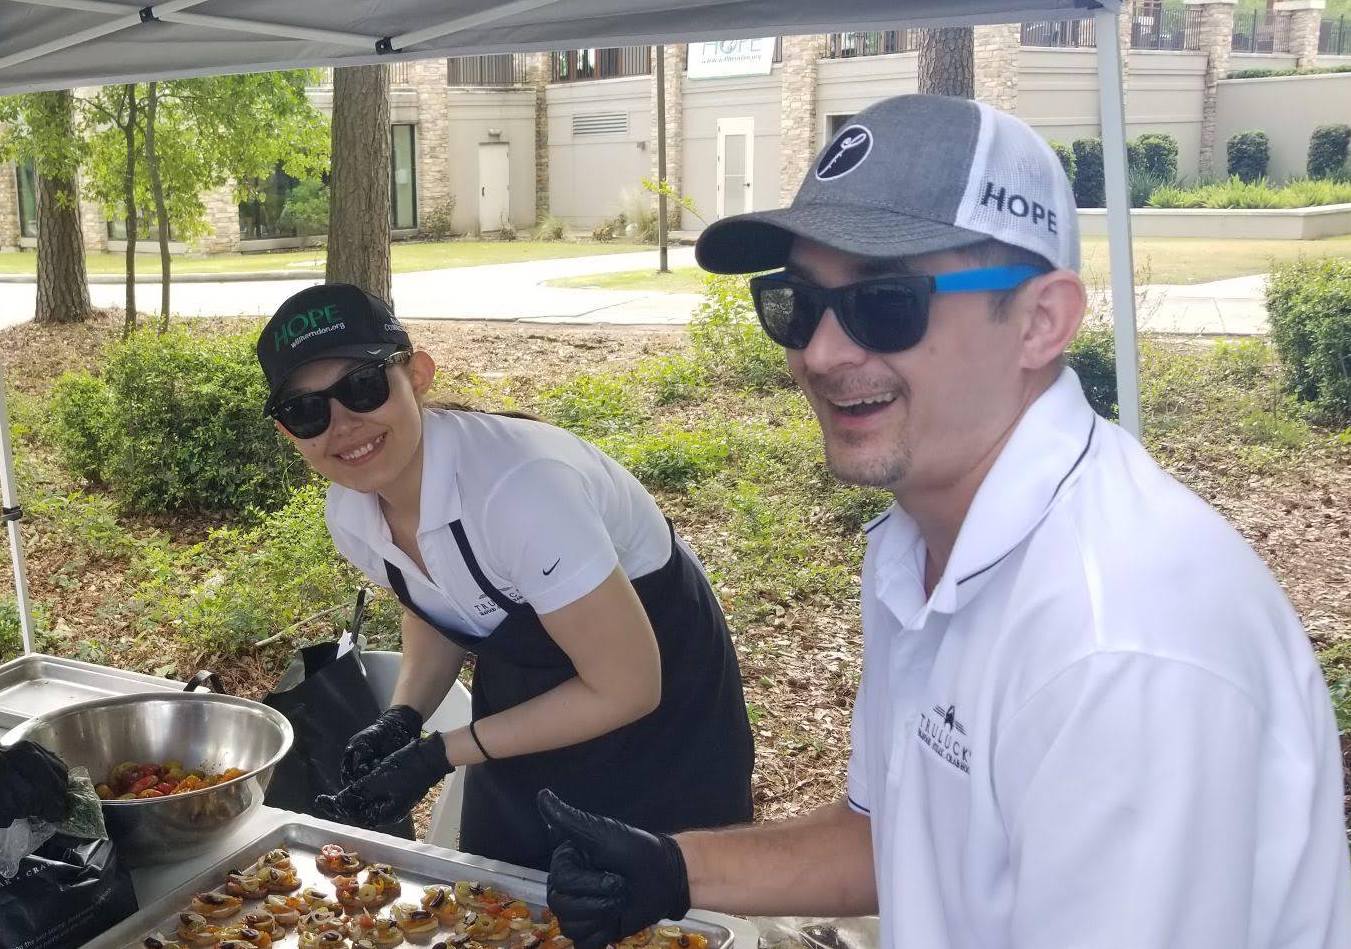 picture of Our staff smiling as they serve food outdoors to community members